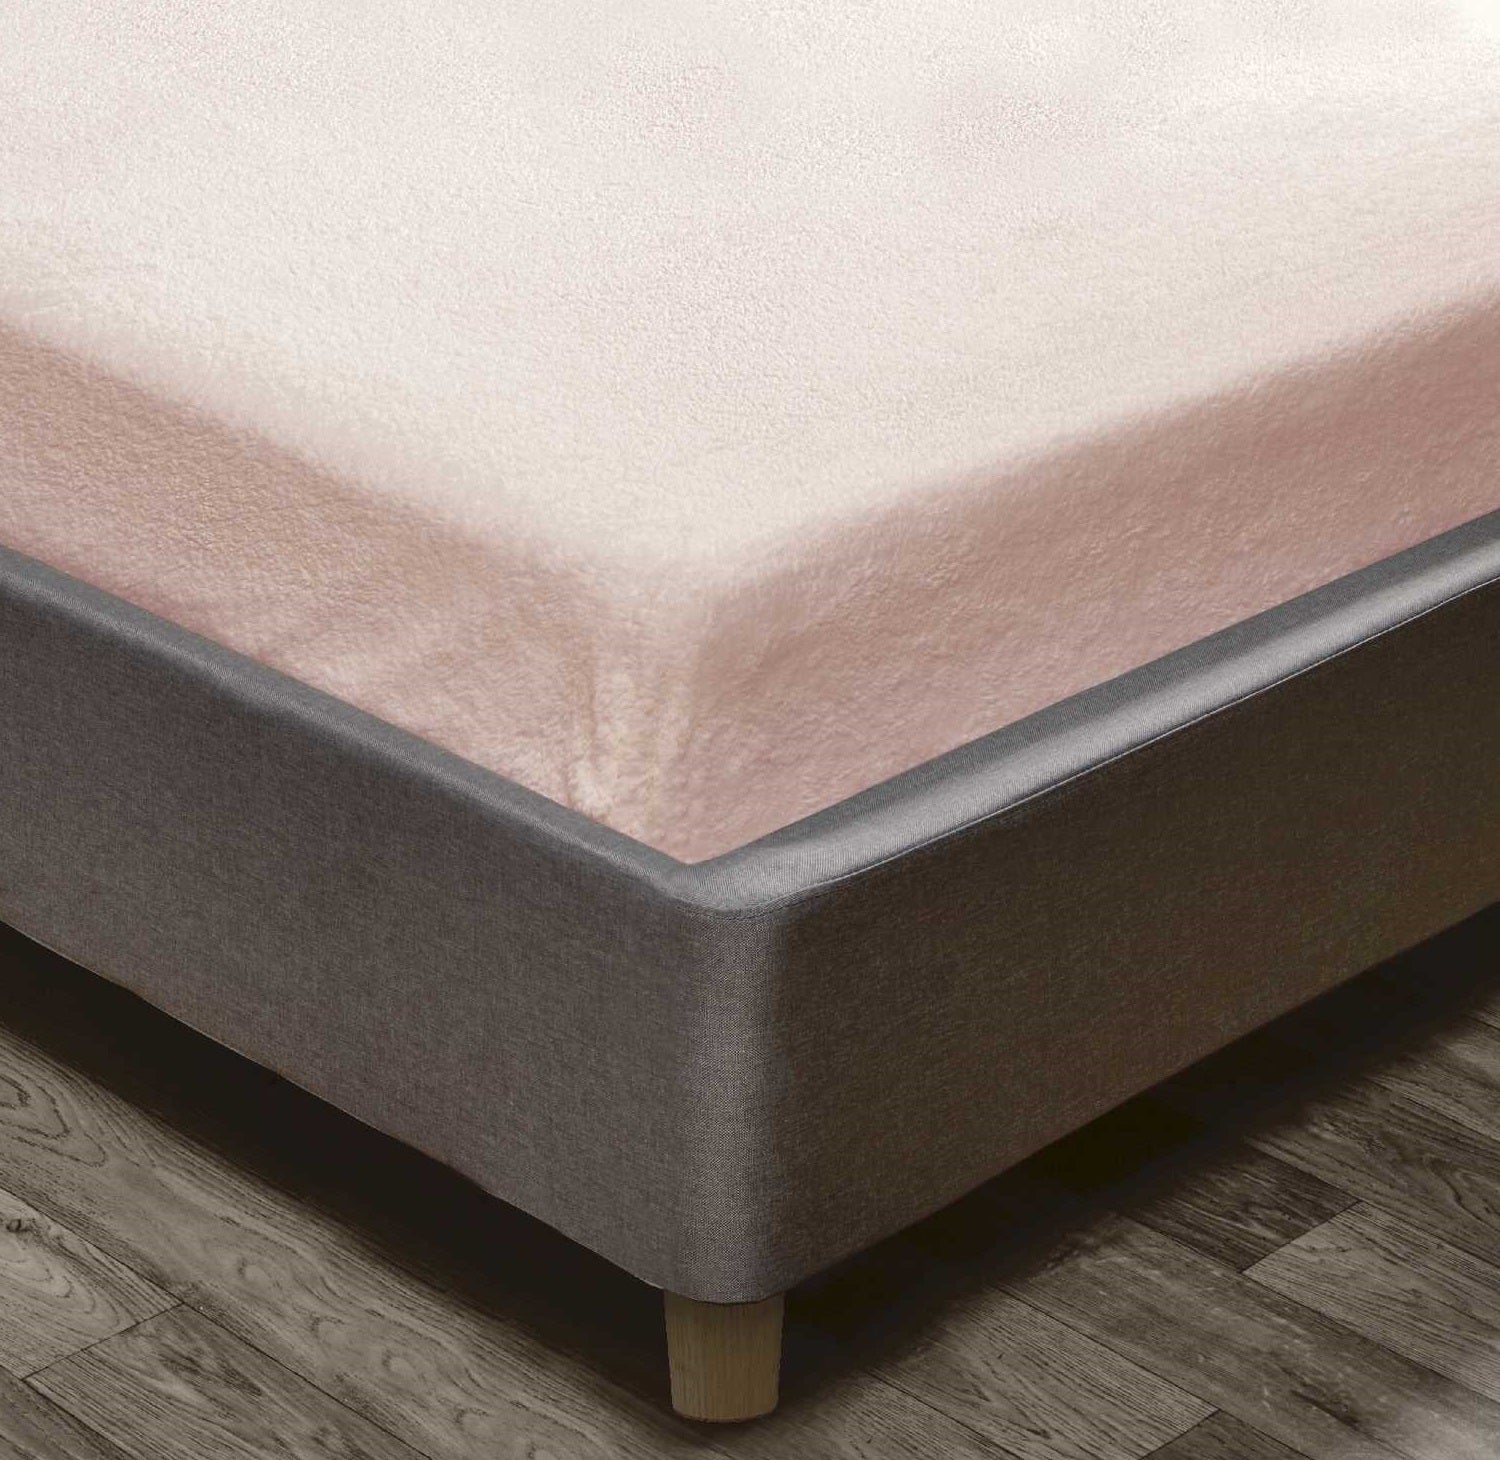 Extra Deep Teddy Fleece Fitted Sheet, Double, Blush Pink